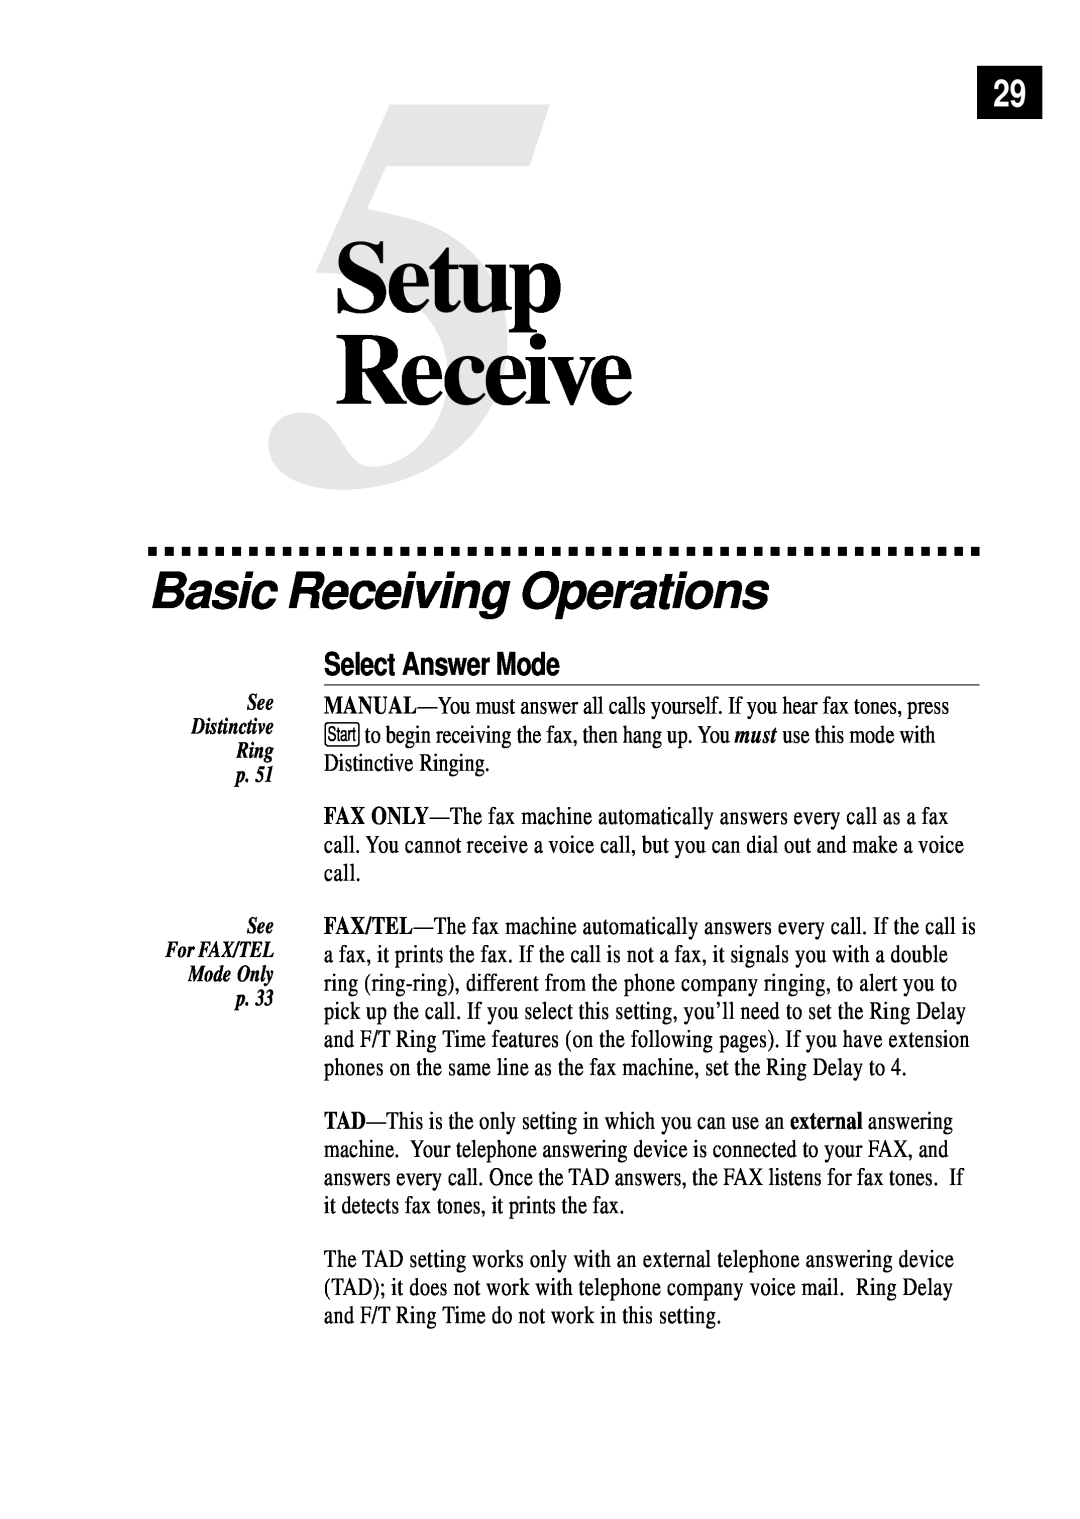 Brother FAX 255 owner manual 5Setup29 Receive, Basic Receiving Operations, Select Answer Mode 